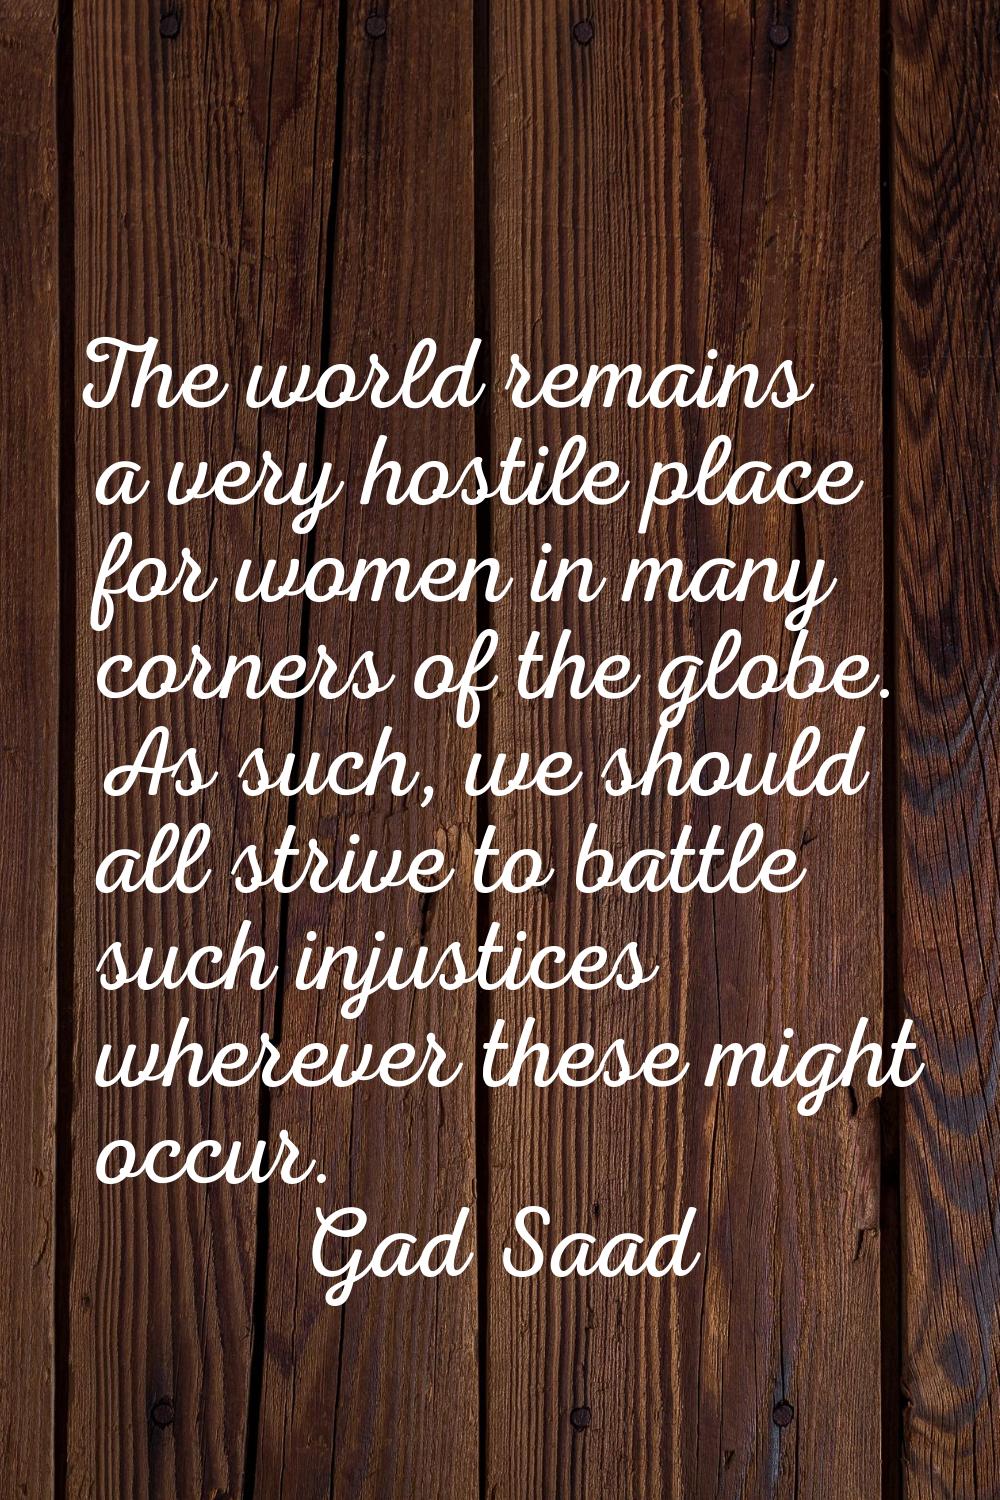 The world remains a very hostile place for women in many corners of the globe. As such, we should a